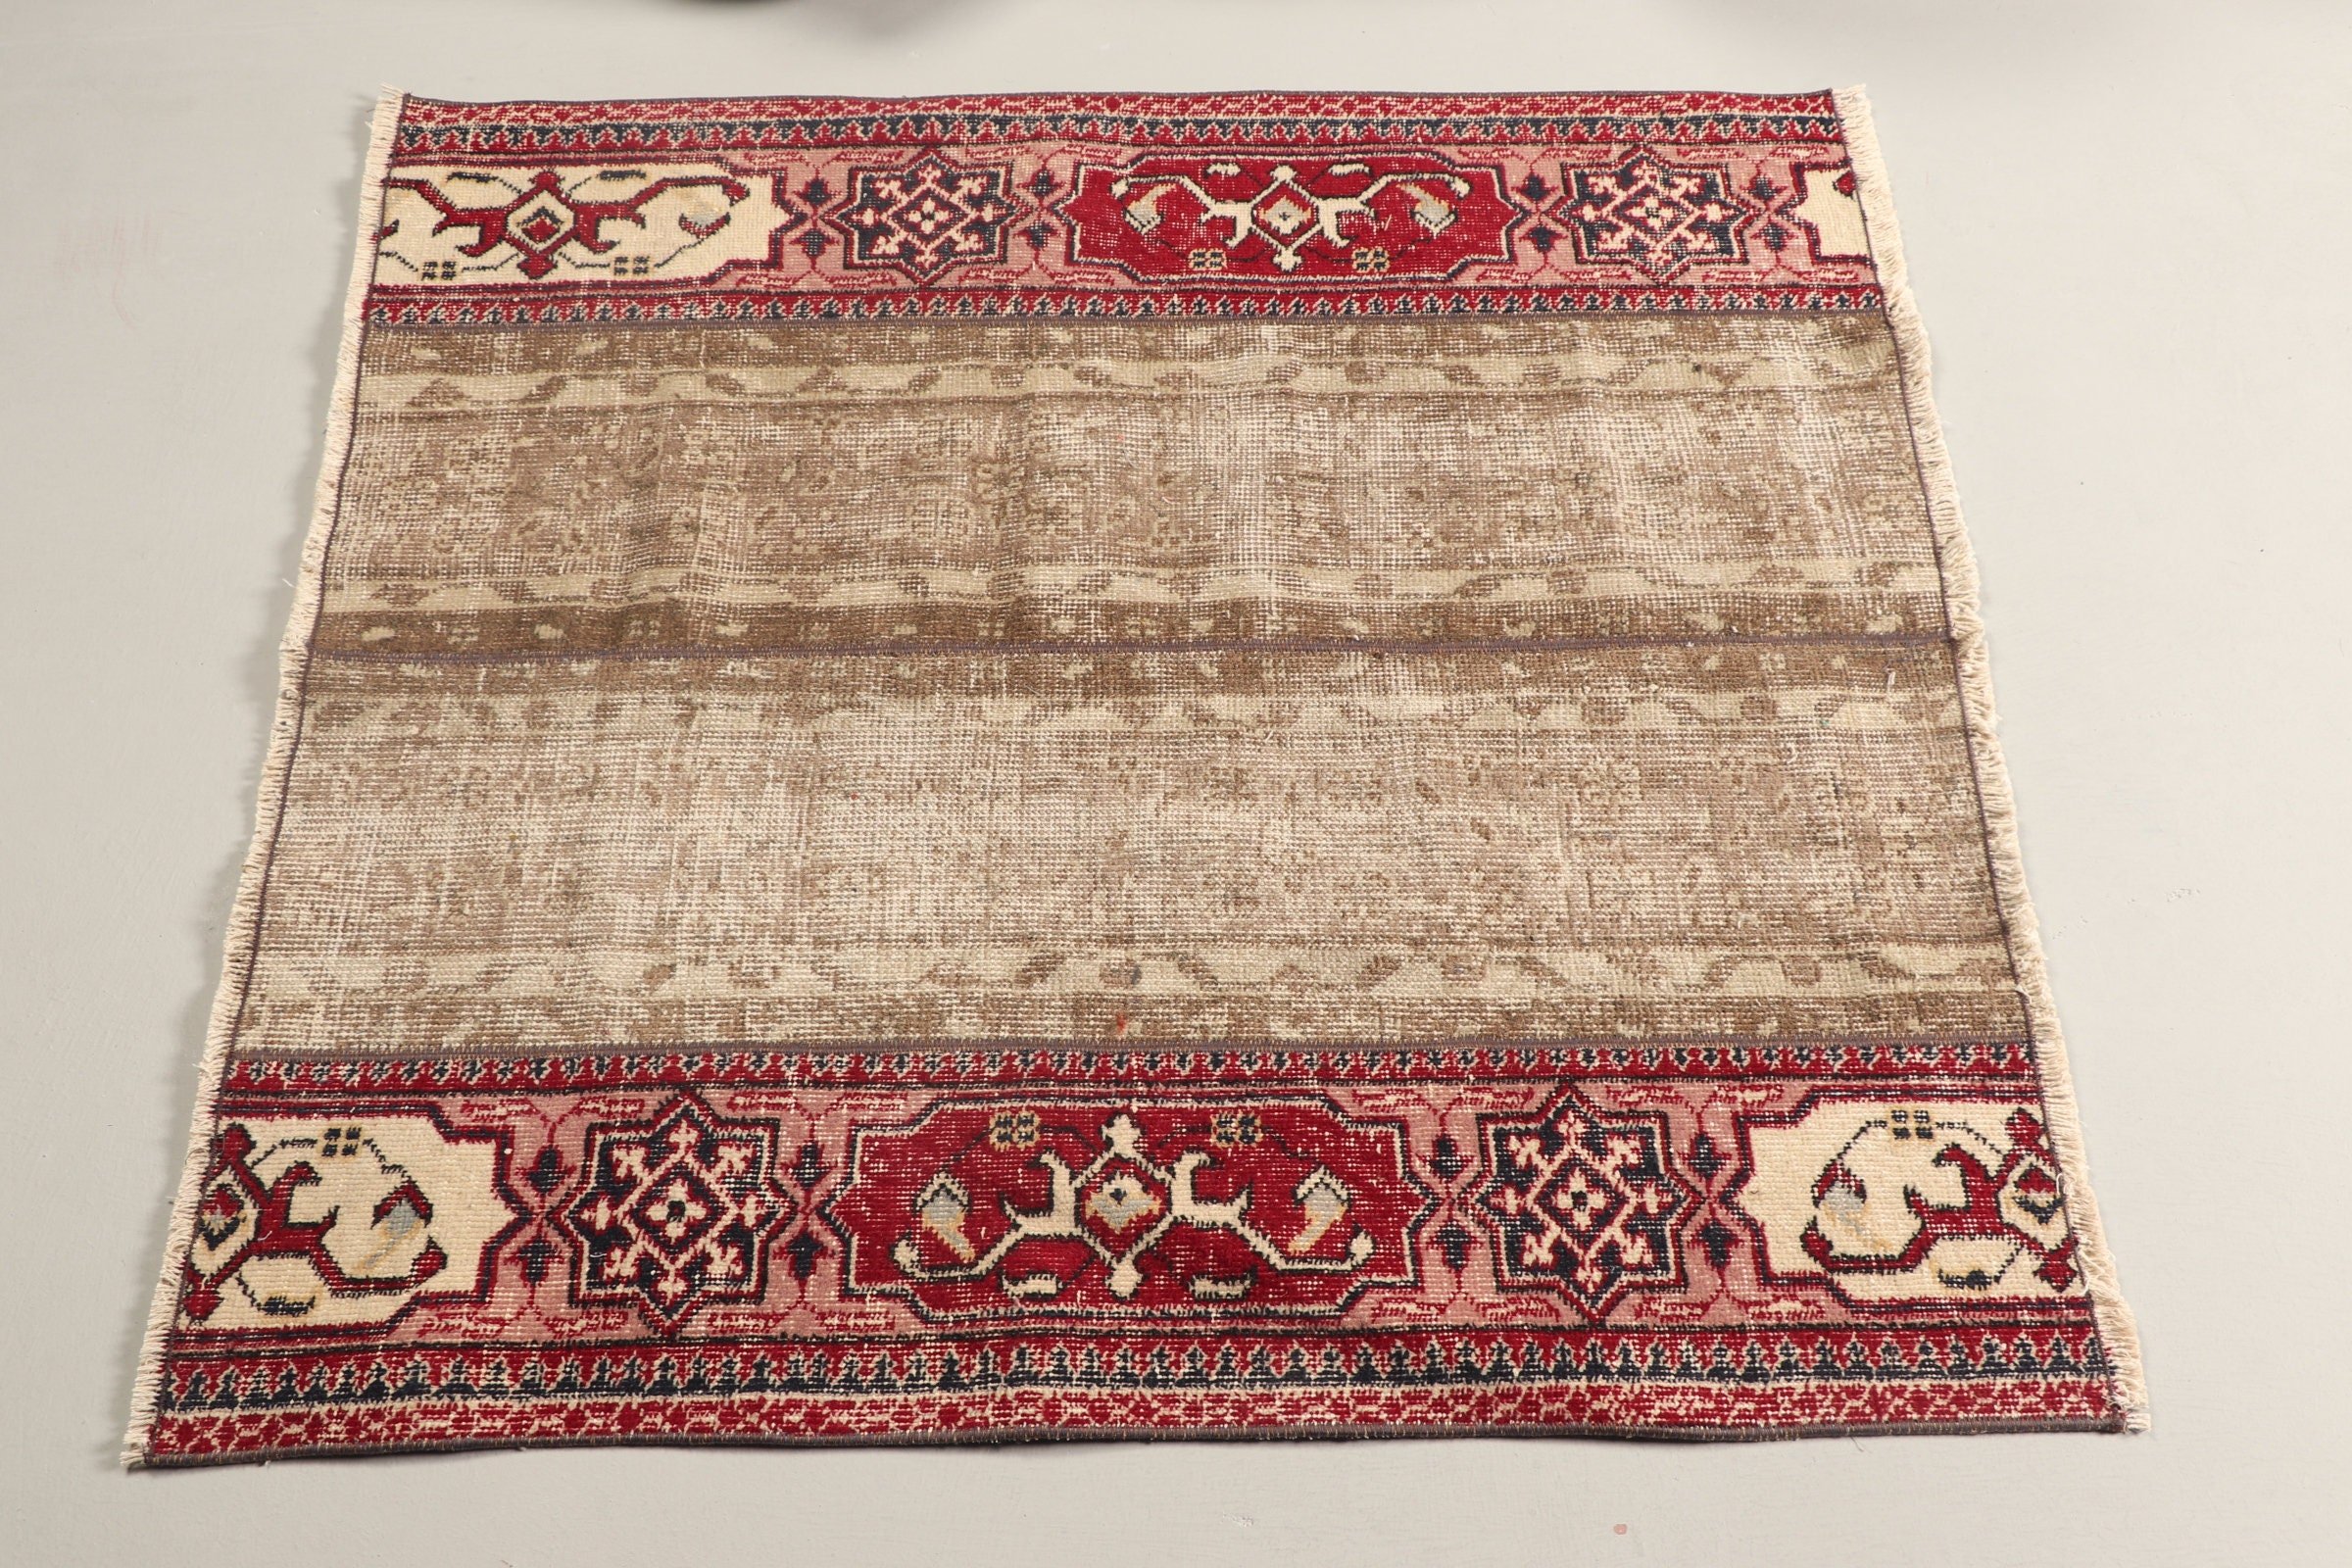 Antique Rug, Wall Hanging Rugs, Vintage Rugs, Red Home Decor Rug, Turkish Rug, Oriental Rug, Bath Rugs, Art Rugs, 3.4x3.6 ft Small Rugs